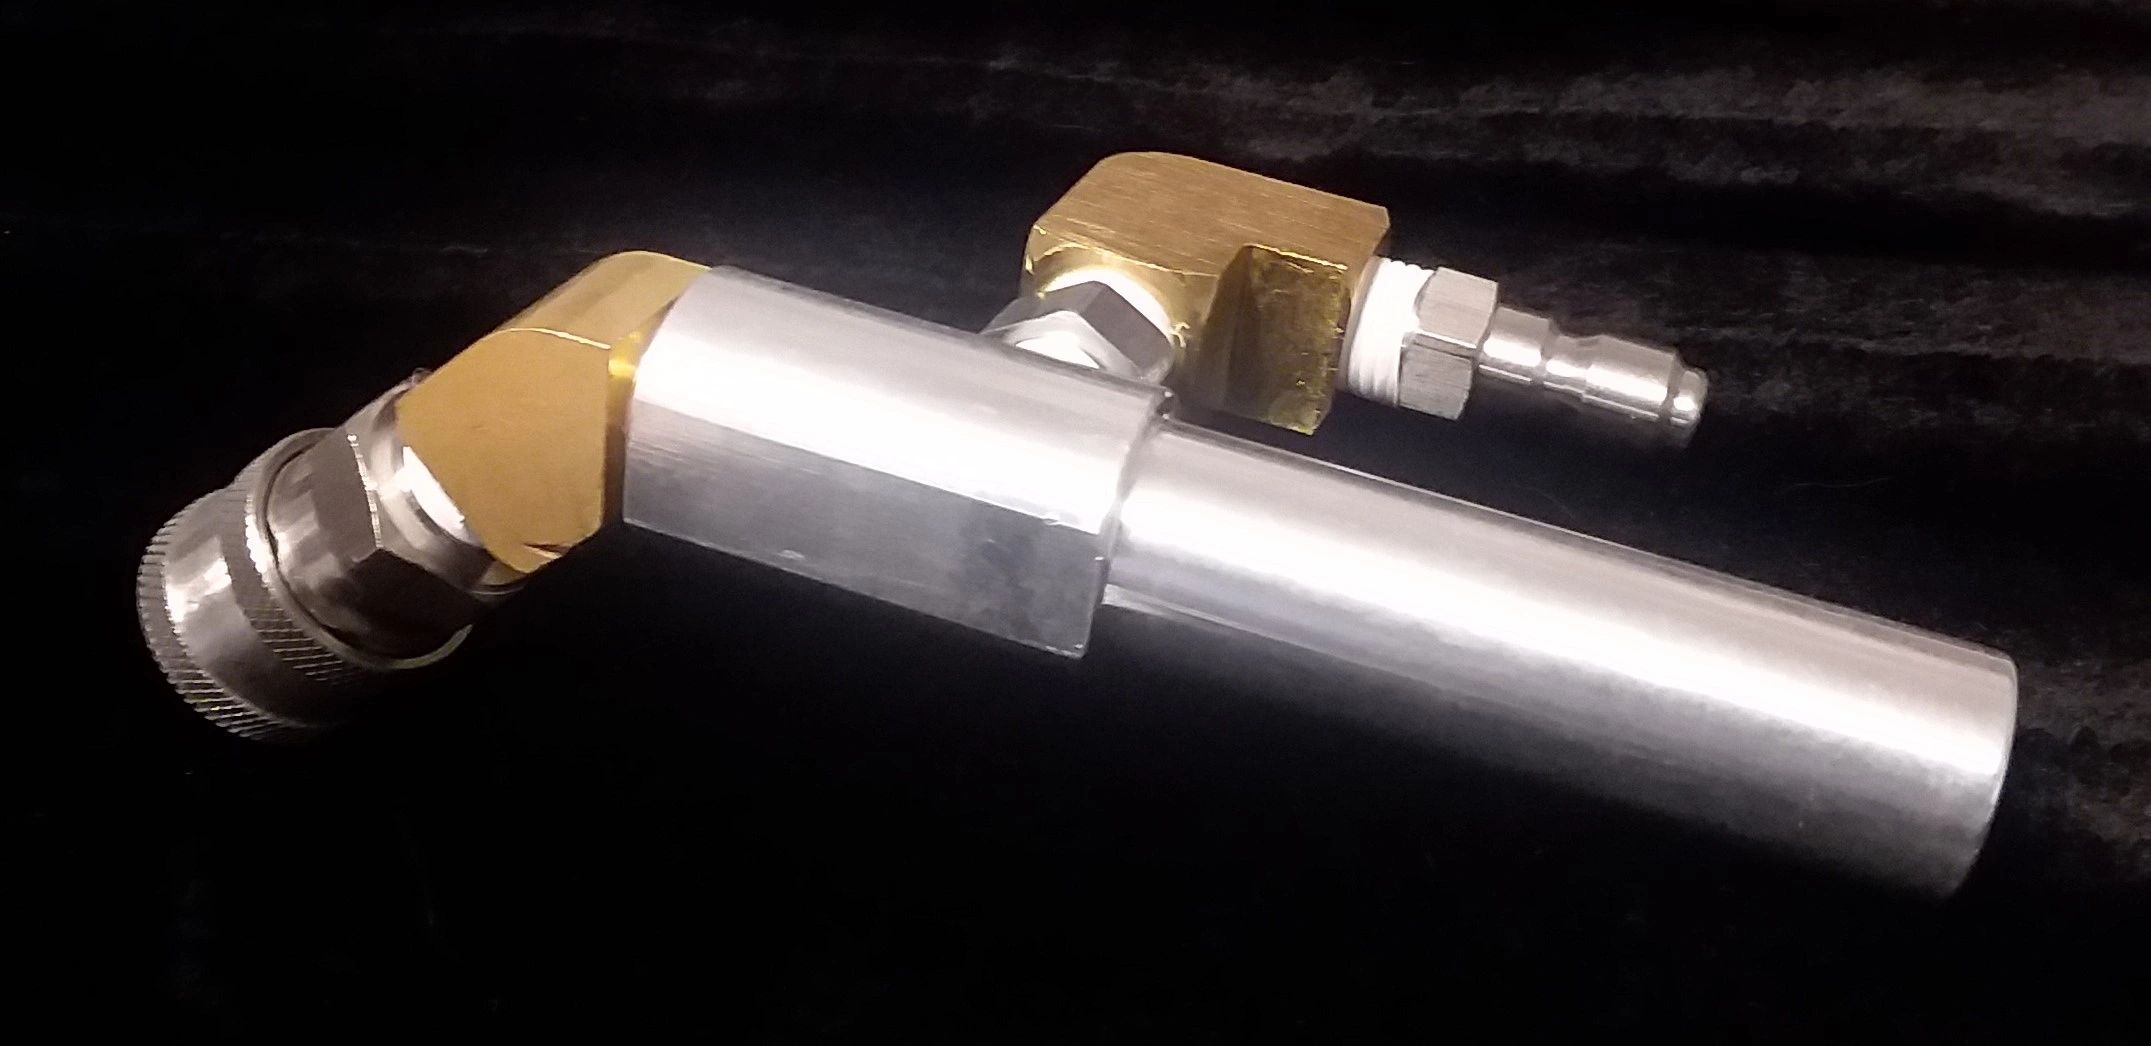 This is the Star of the Show! Stainless Steel and brass fittings, all new parts, guaranteed!!